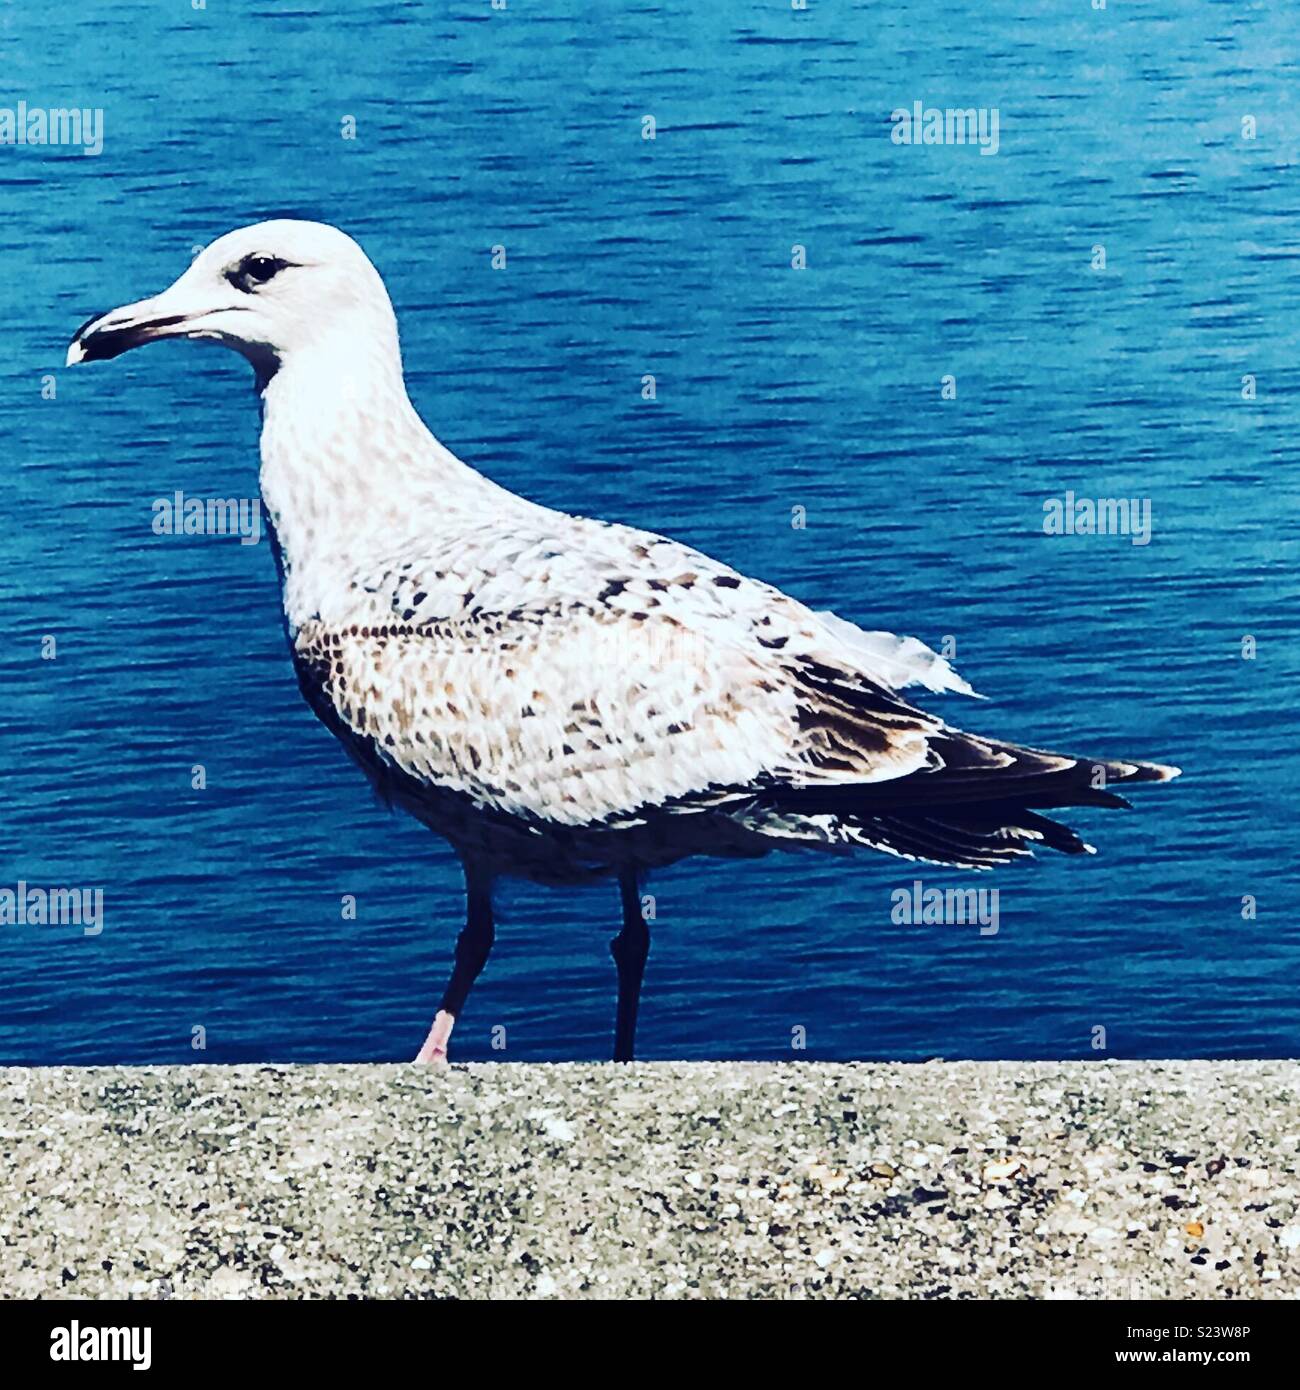 Seagull on wall by the sea. Stock Photo